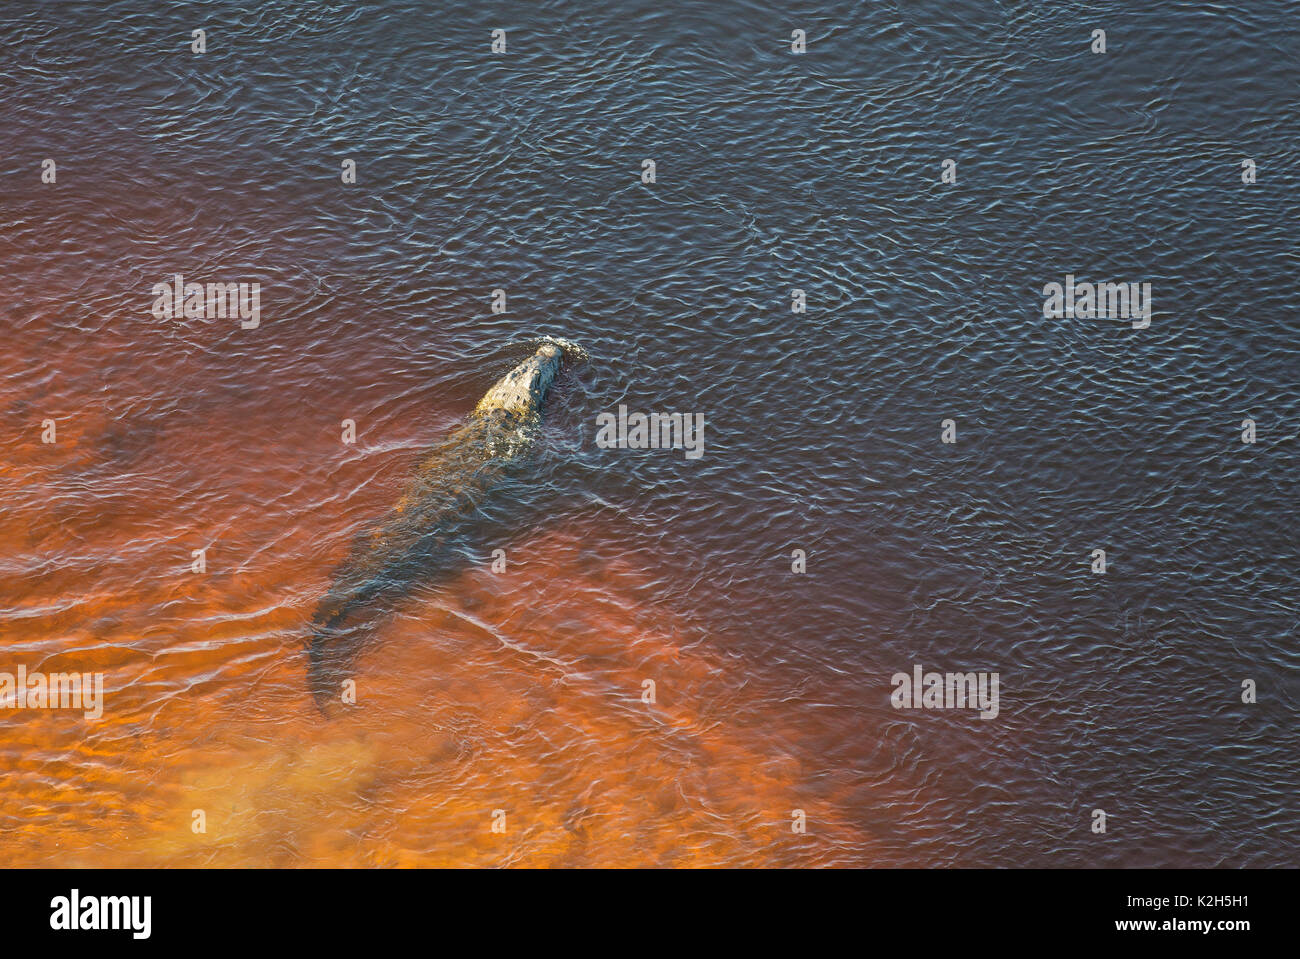 Nile Crocodile (Crocodylus niloticus), at the sandy shore of a freshwater marsh, aerial view, Stock Photo